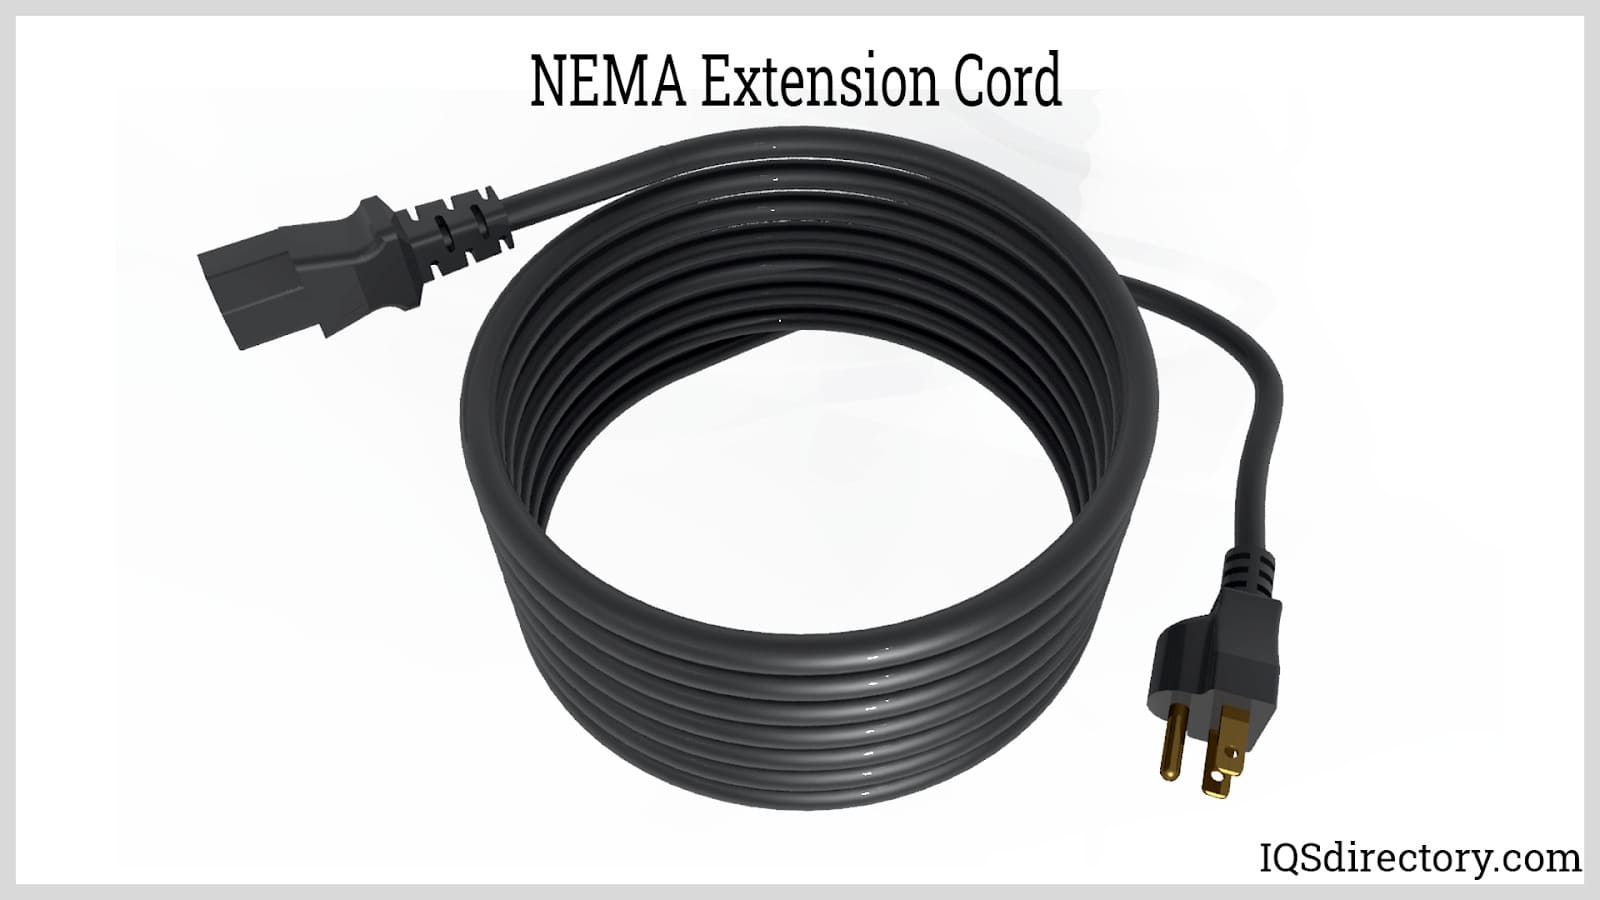 100 foot explosion proof extension cord 20 amp, 120v with plug and connector